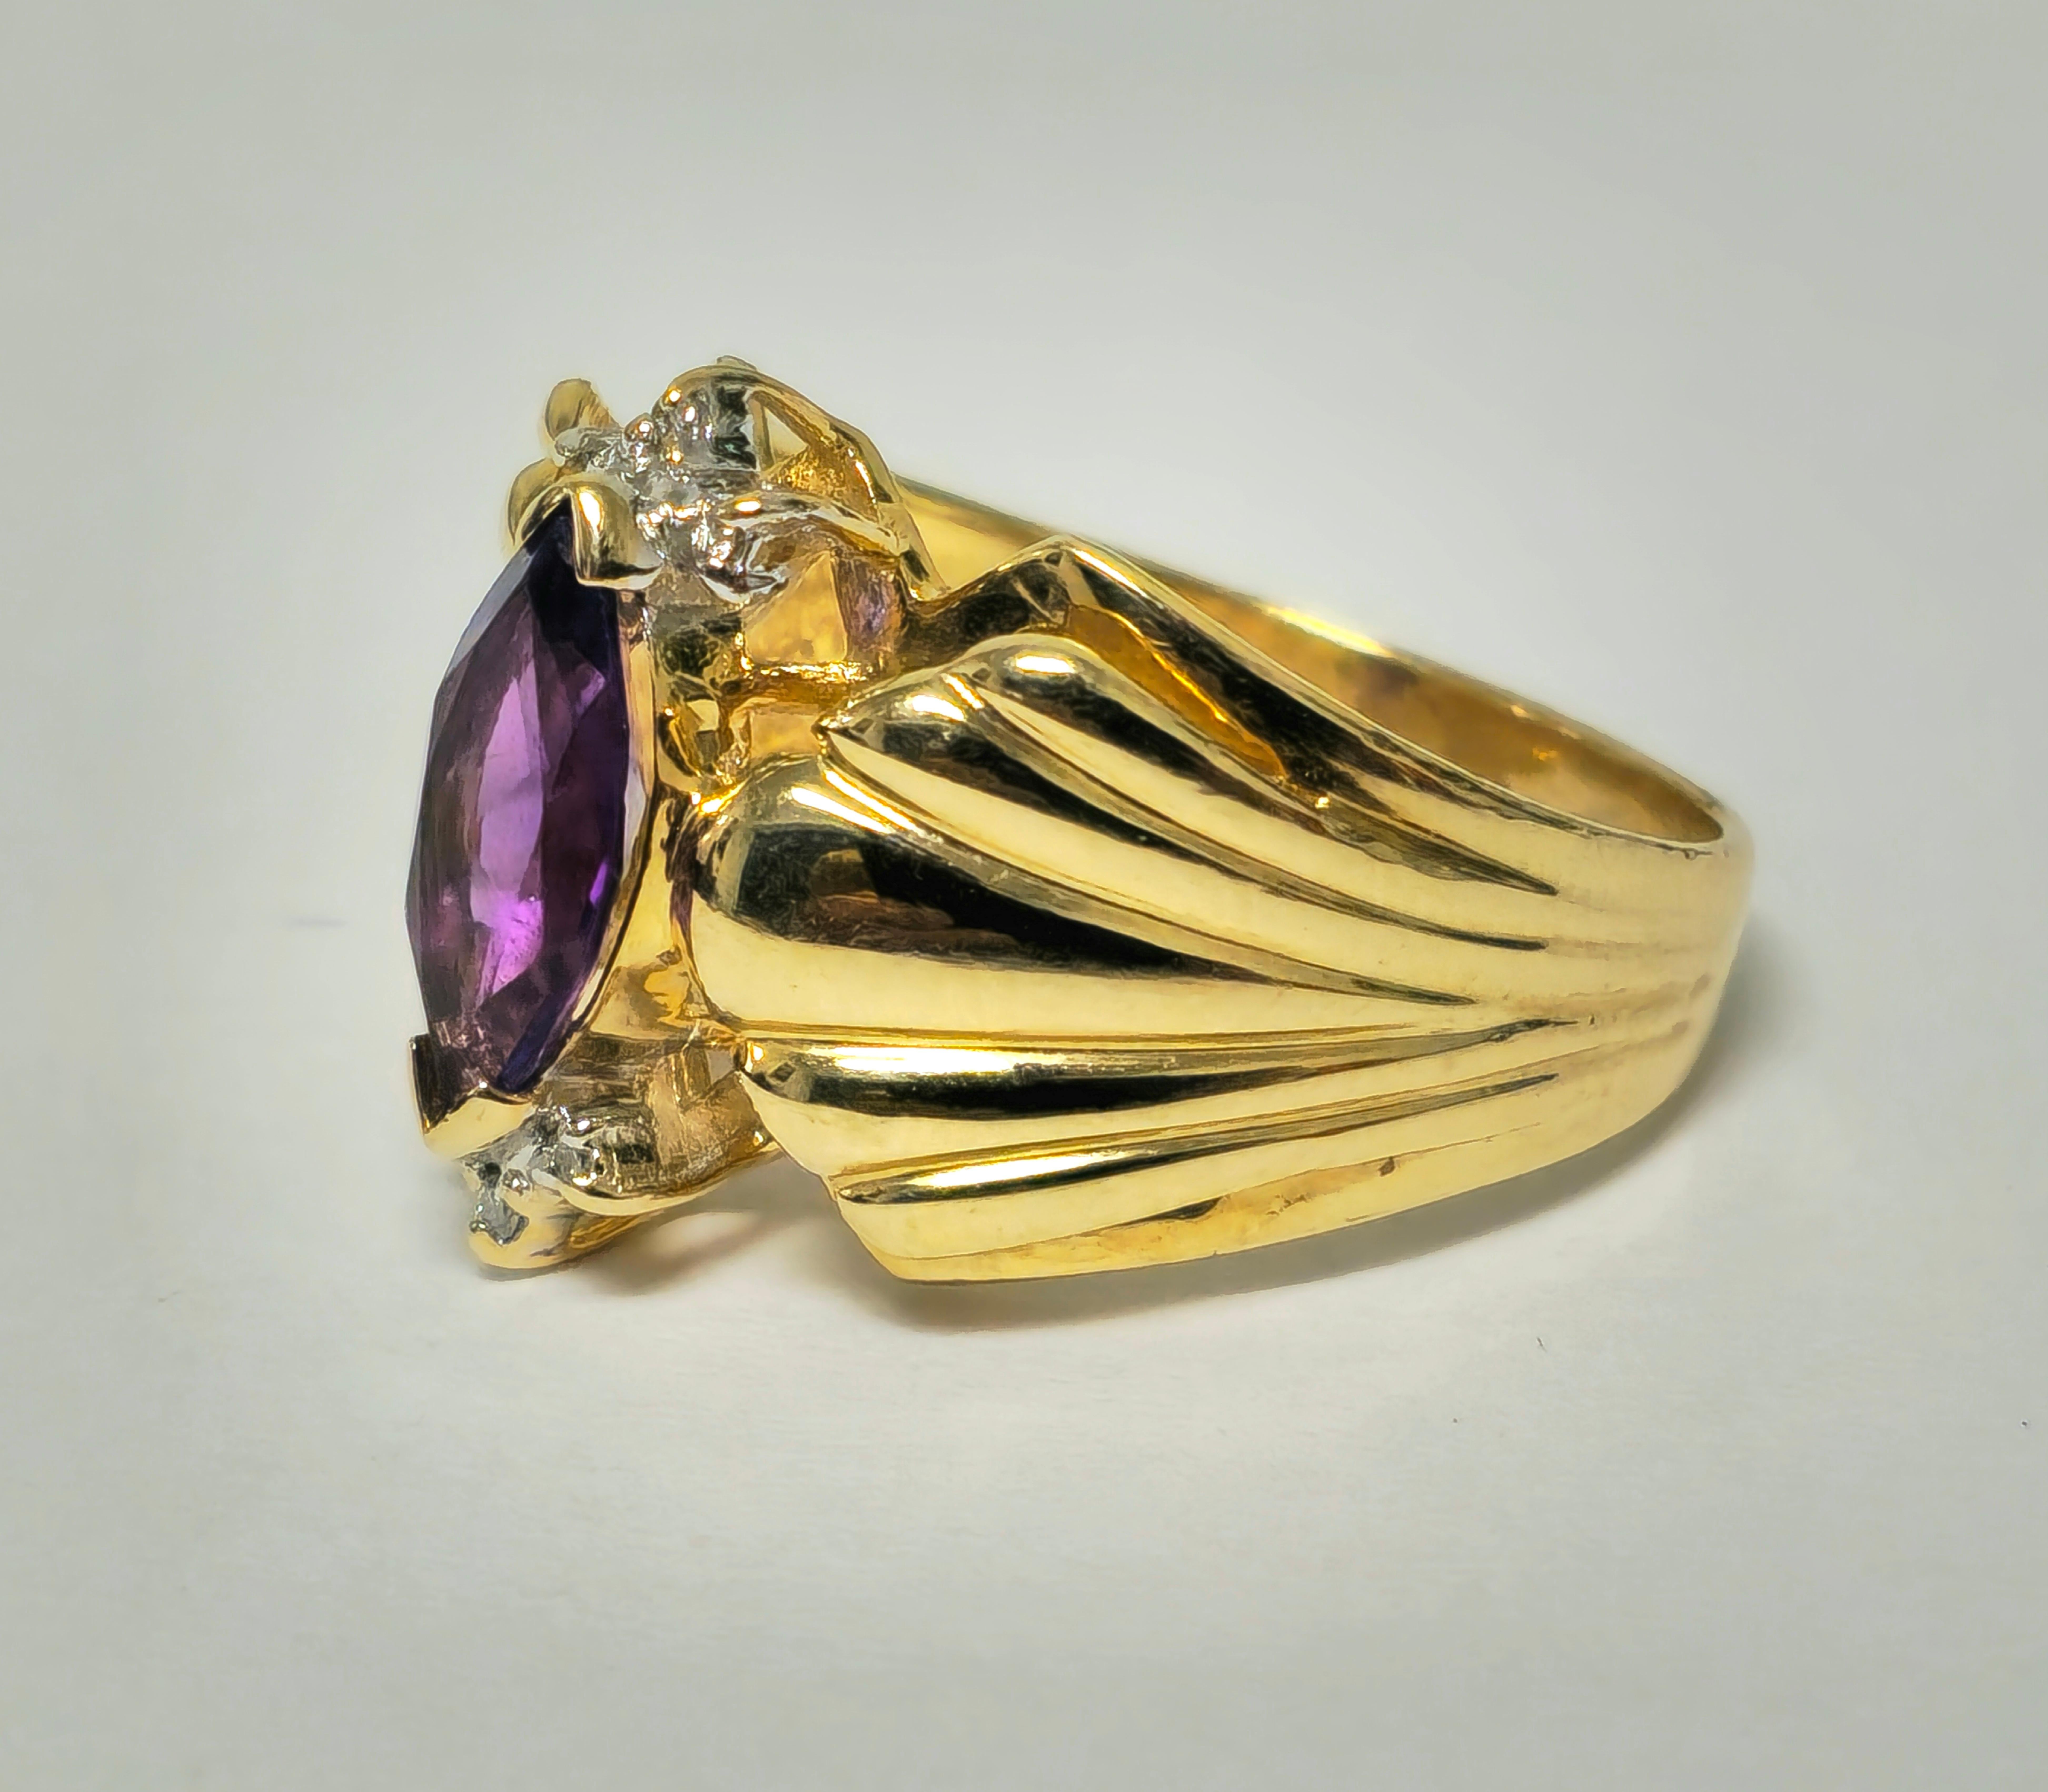 Elevate your style with our Vintage Victorian Fine Jewelry Cocktail Ring, featuring a captivating 2.30 carat marquise-shaped amethyst and 0.10 carats of round-cut diamonds. Crafted from luxurious 14k yellow gold, this ring exudes timeless elegance